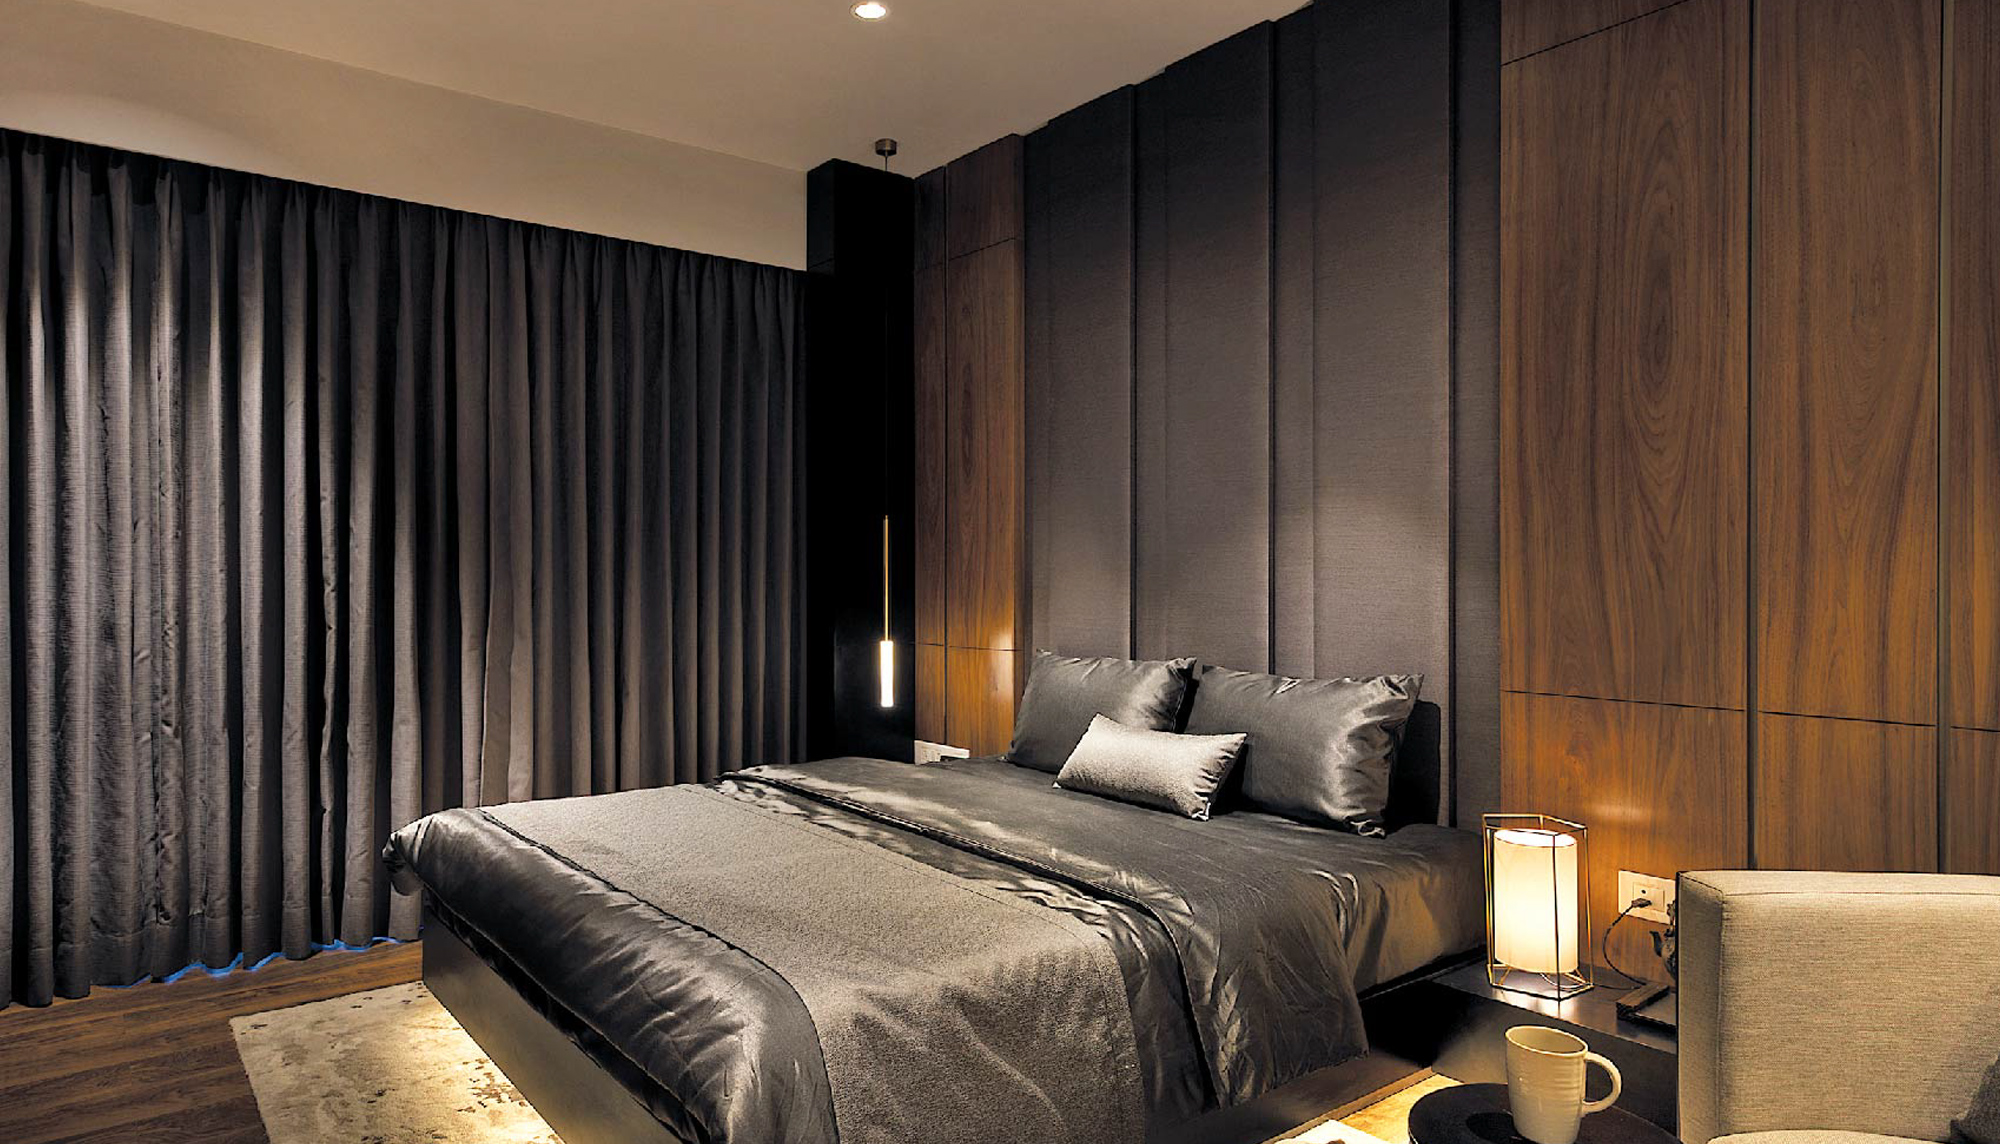 Krisumi Waterfall Residences - Bed-Room
